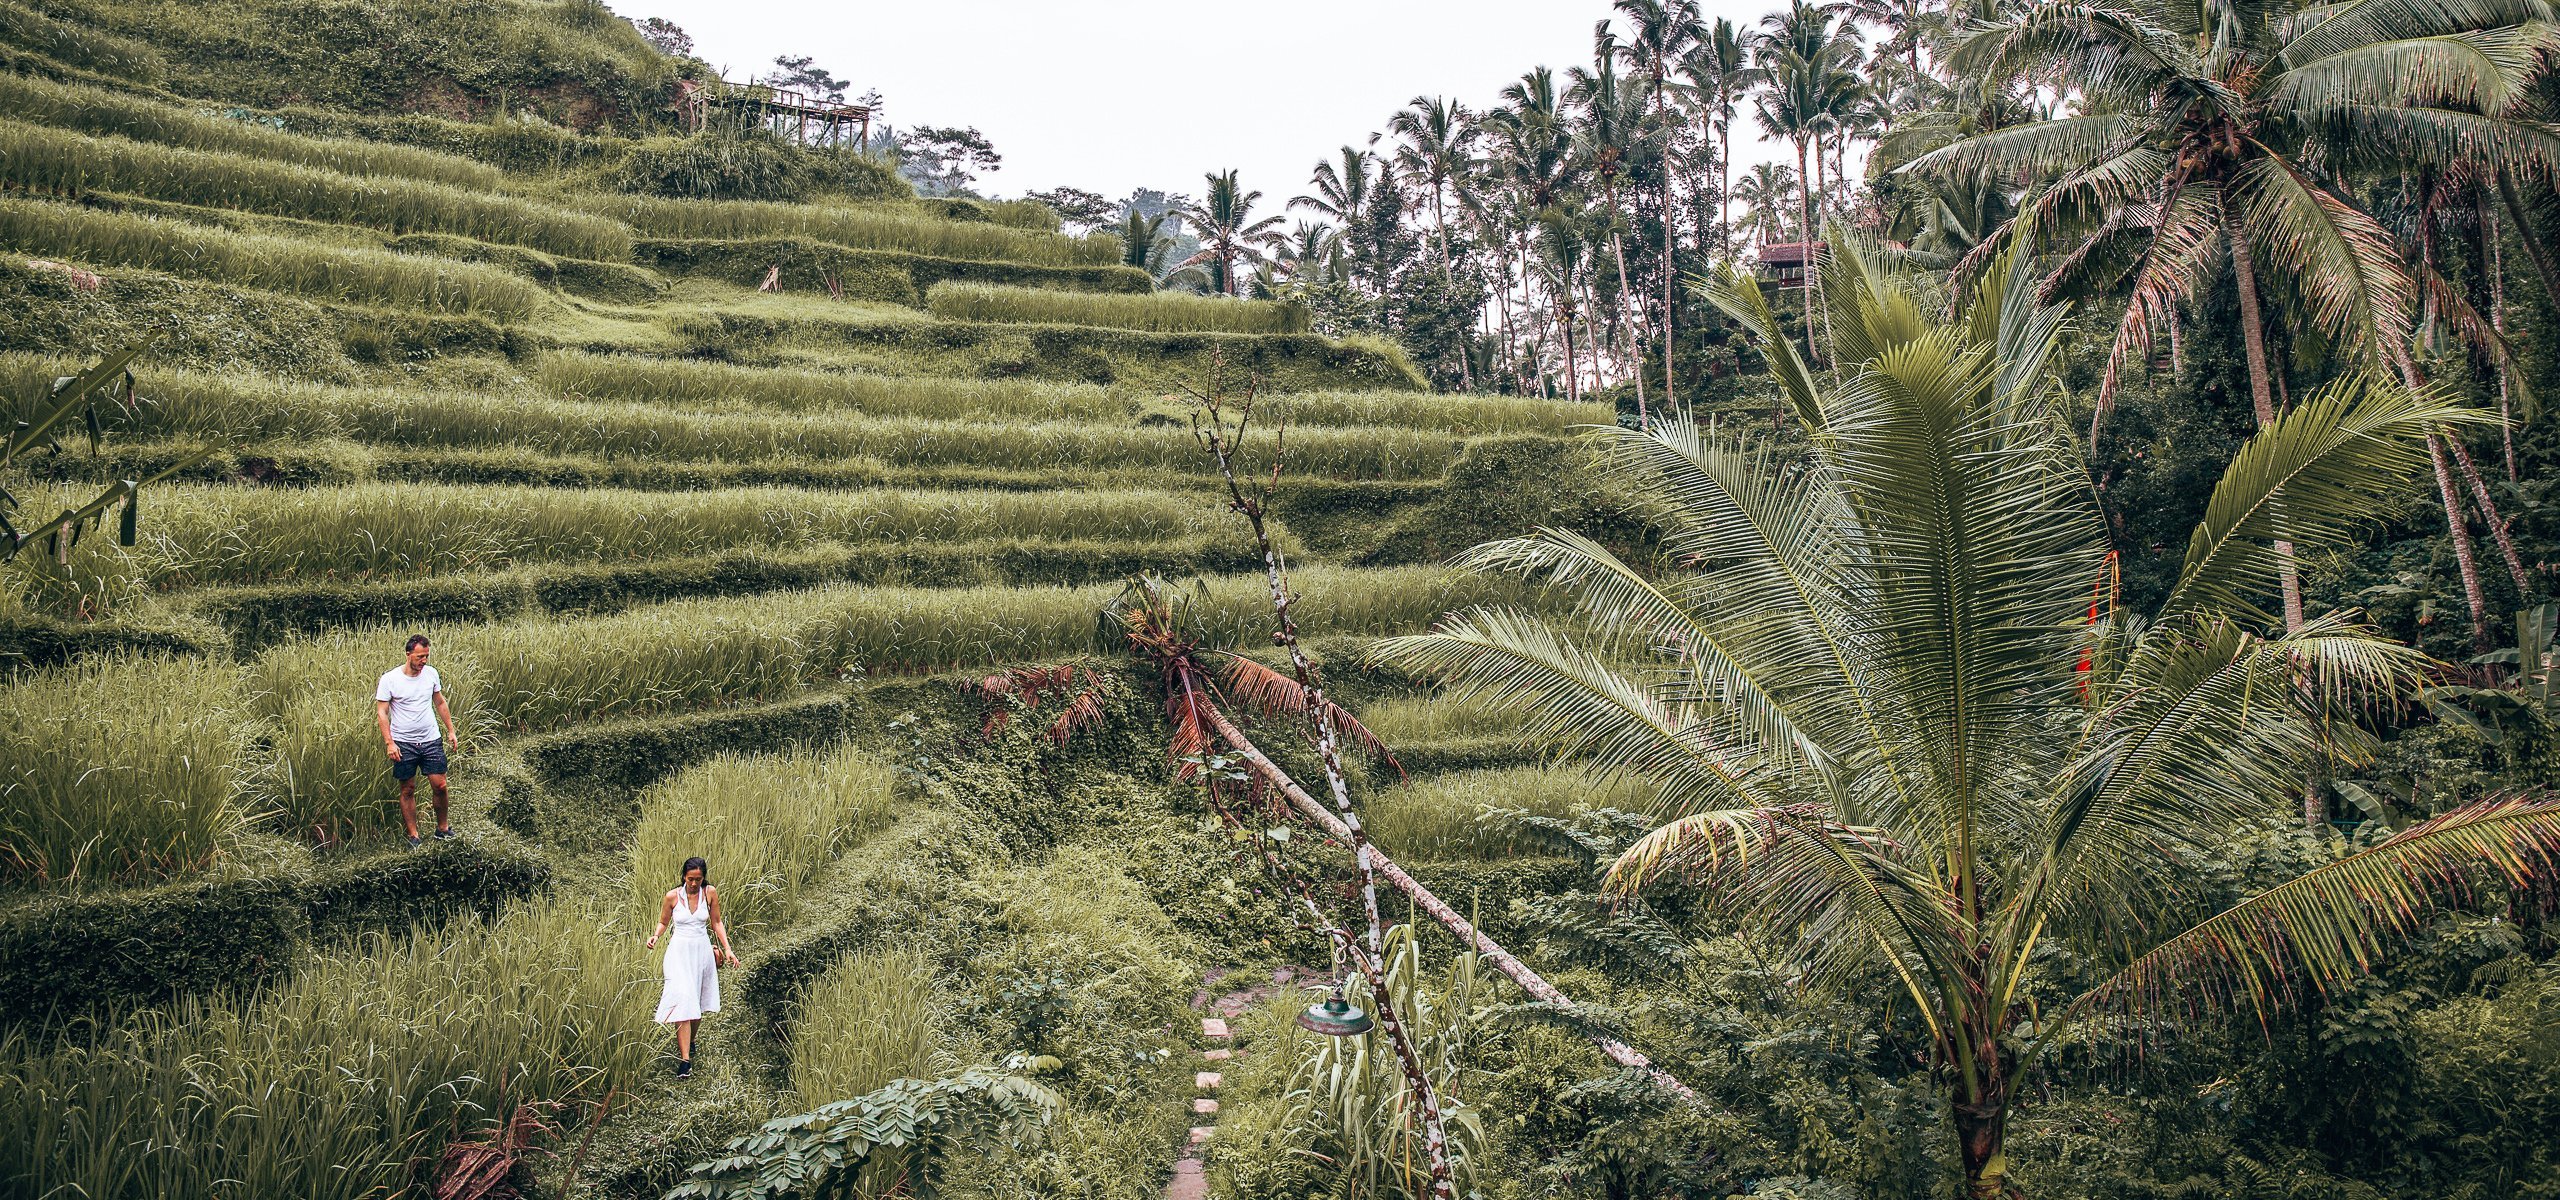 A man and woman dressed in white walk along the rice fields of Tegallalang Rice Terrace in Ubud, Bali